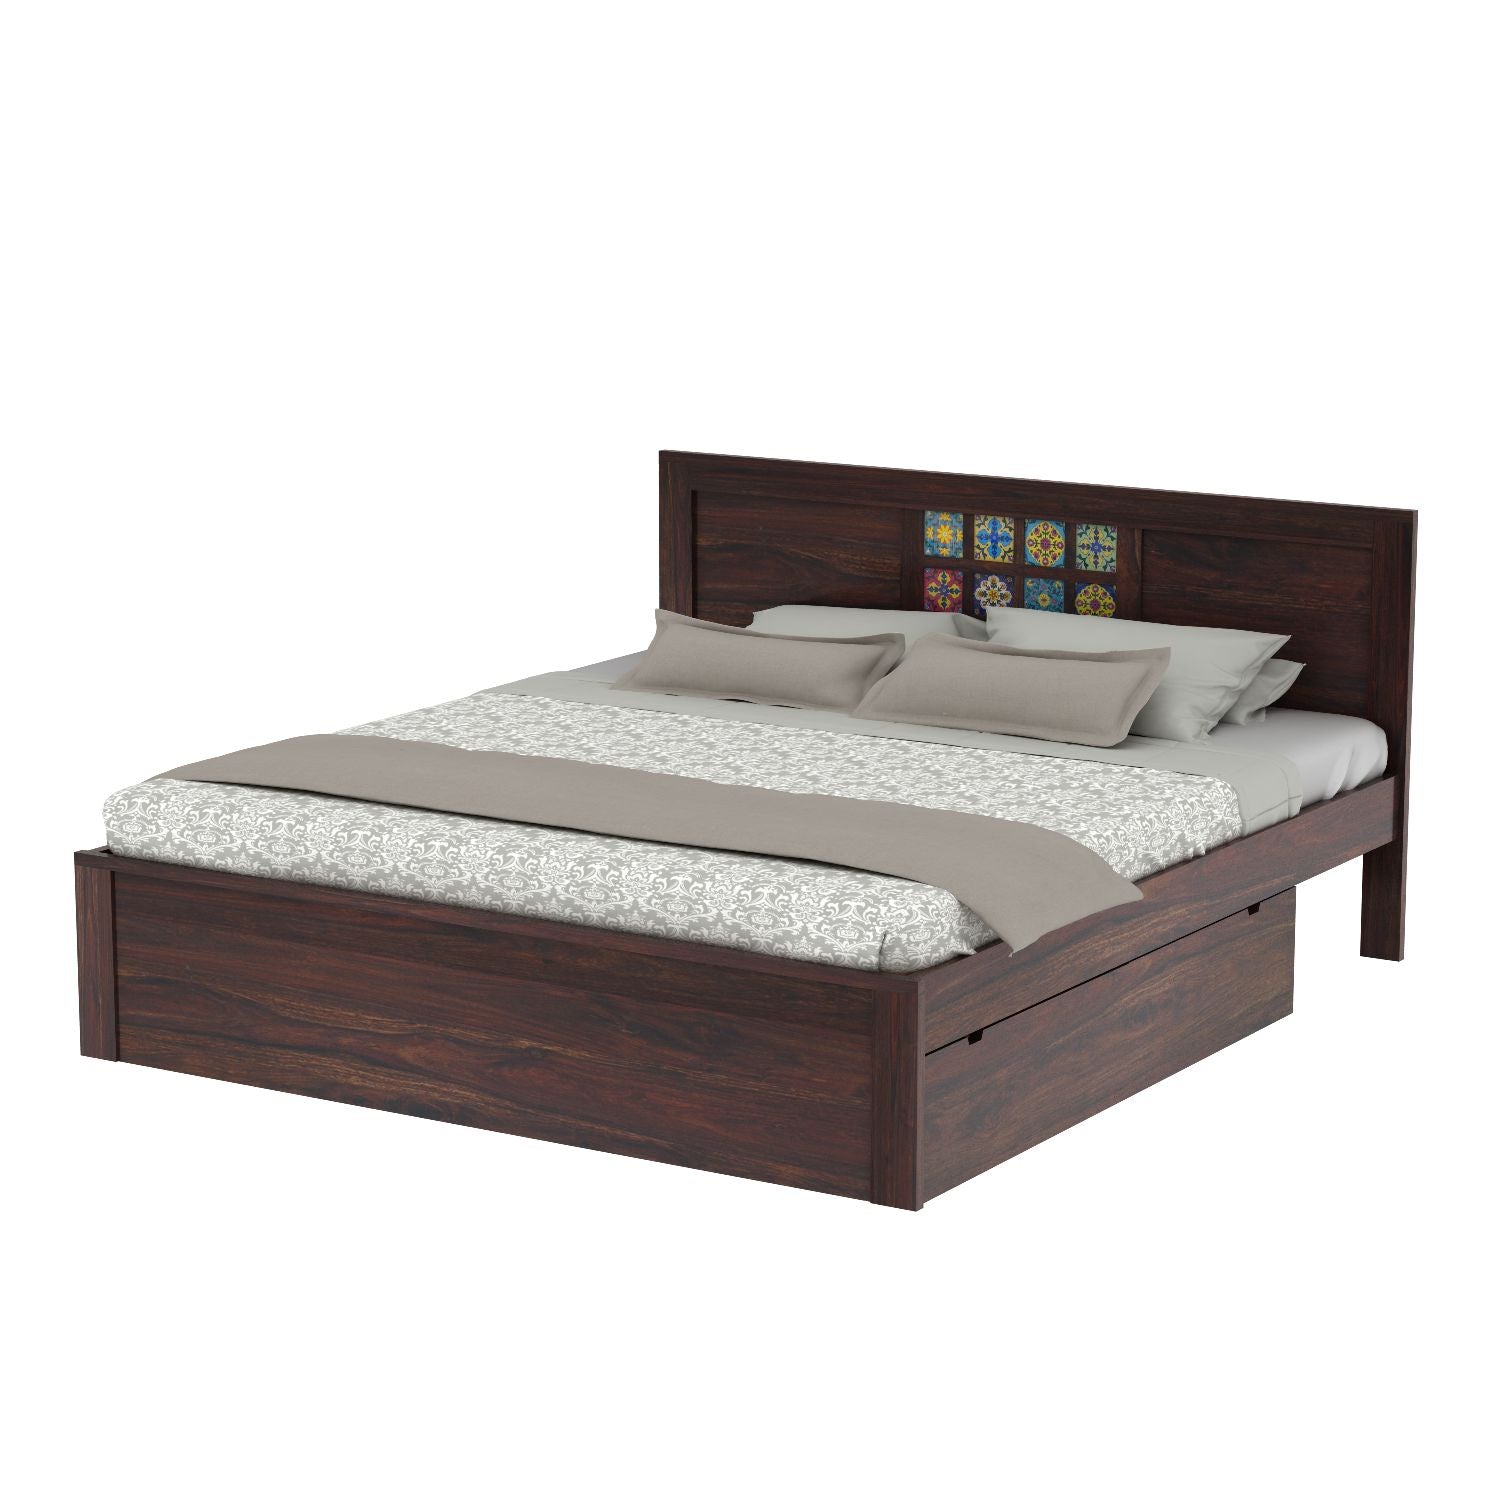 Dotwork Solid Sheesham Wood Bed With Two Drawers (King Size, Walnut Finish)